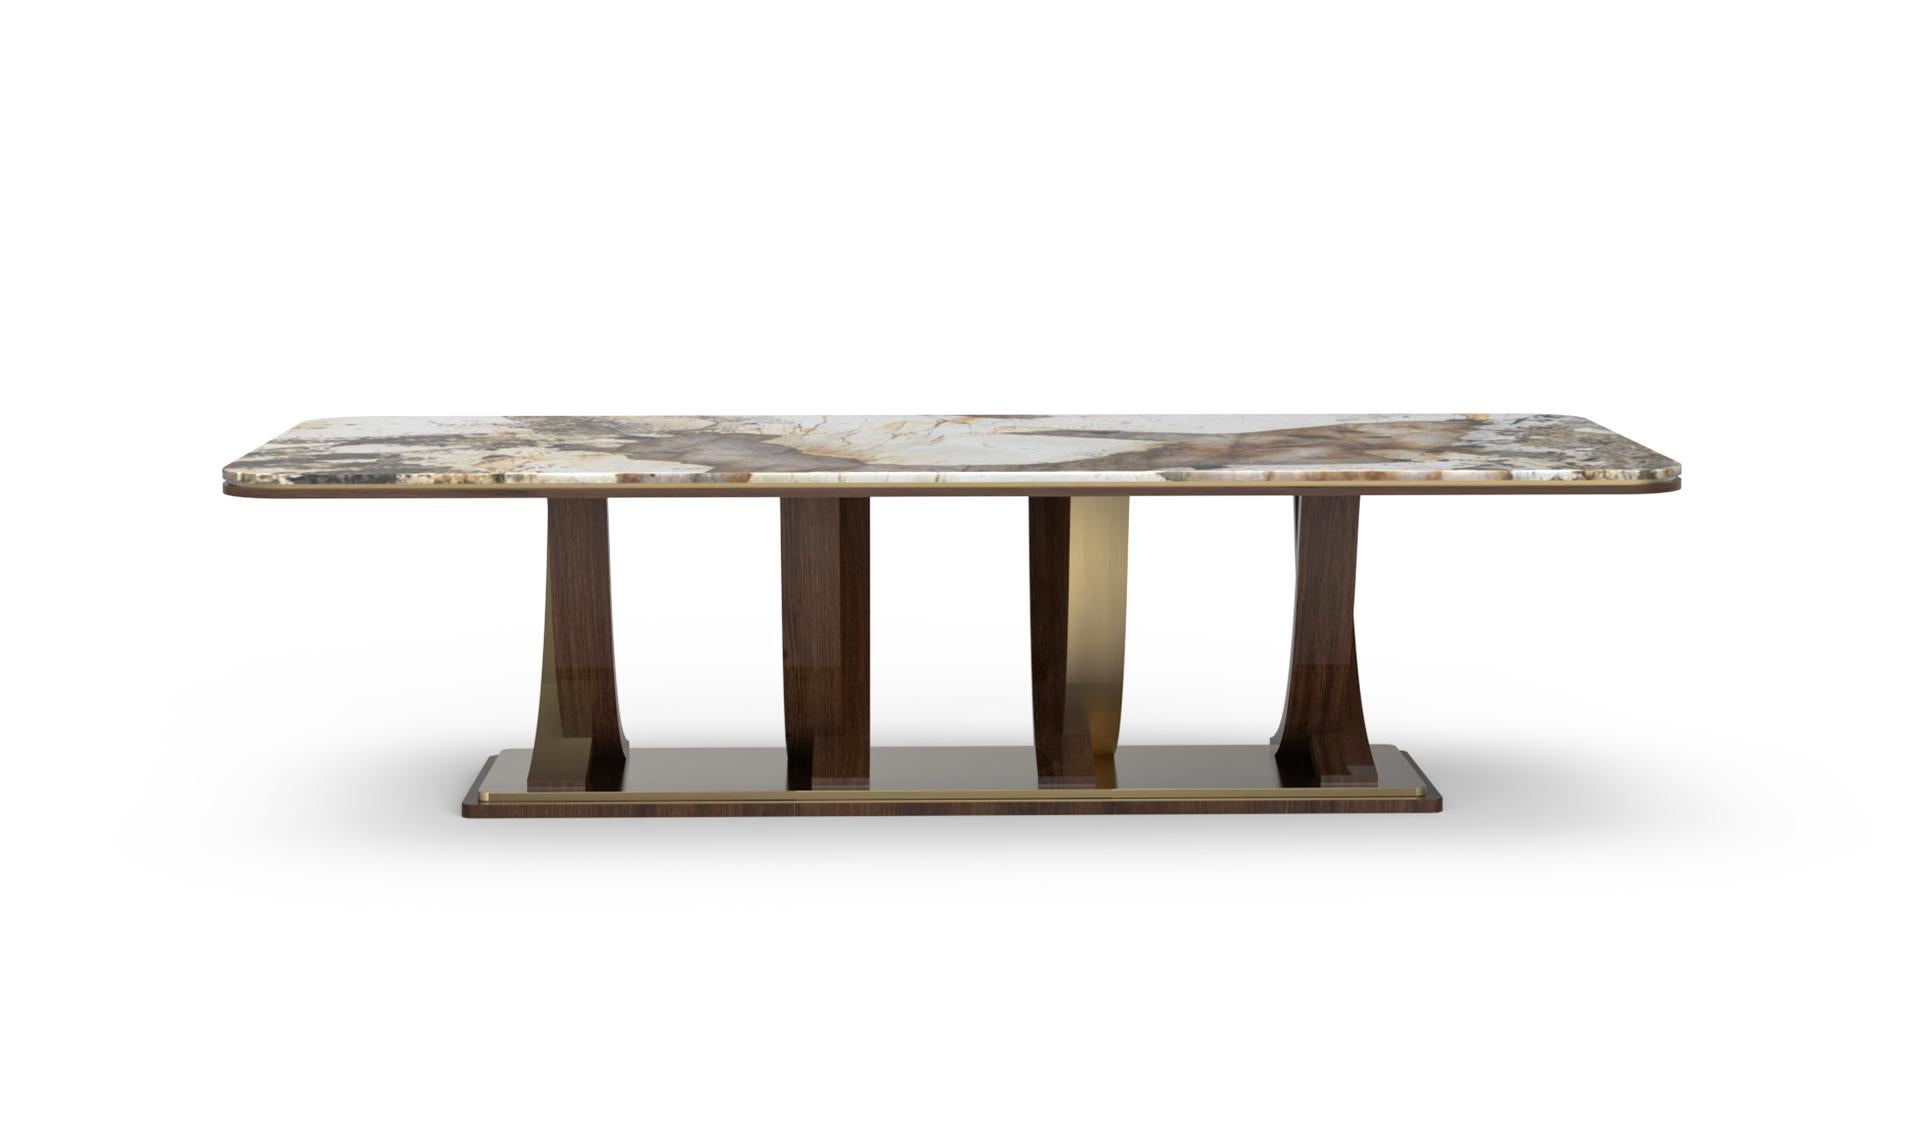 Fontaine Dining Table, Modern Collection, Handcrafted in Portugal - Europe by GF Modern.

The Fontaine dining table is named after Jean de La Fontaine, a French poet and fabulist, reflecting the Art Deco style that symbolizes the dawn of a new